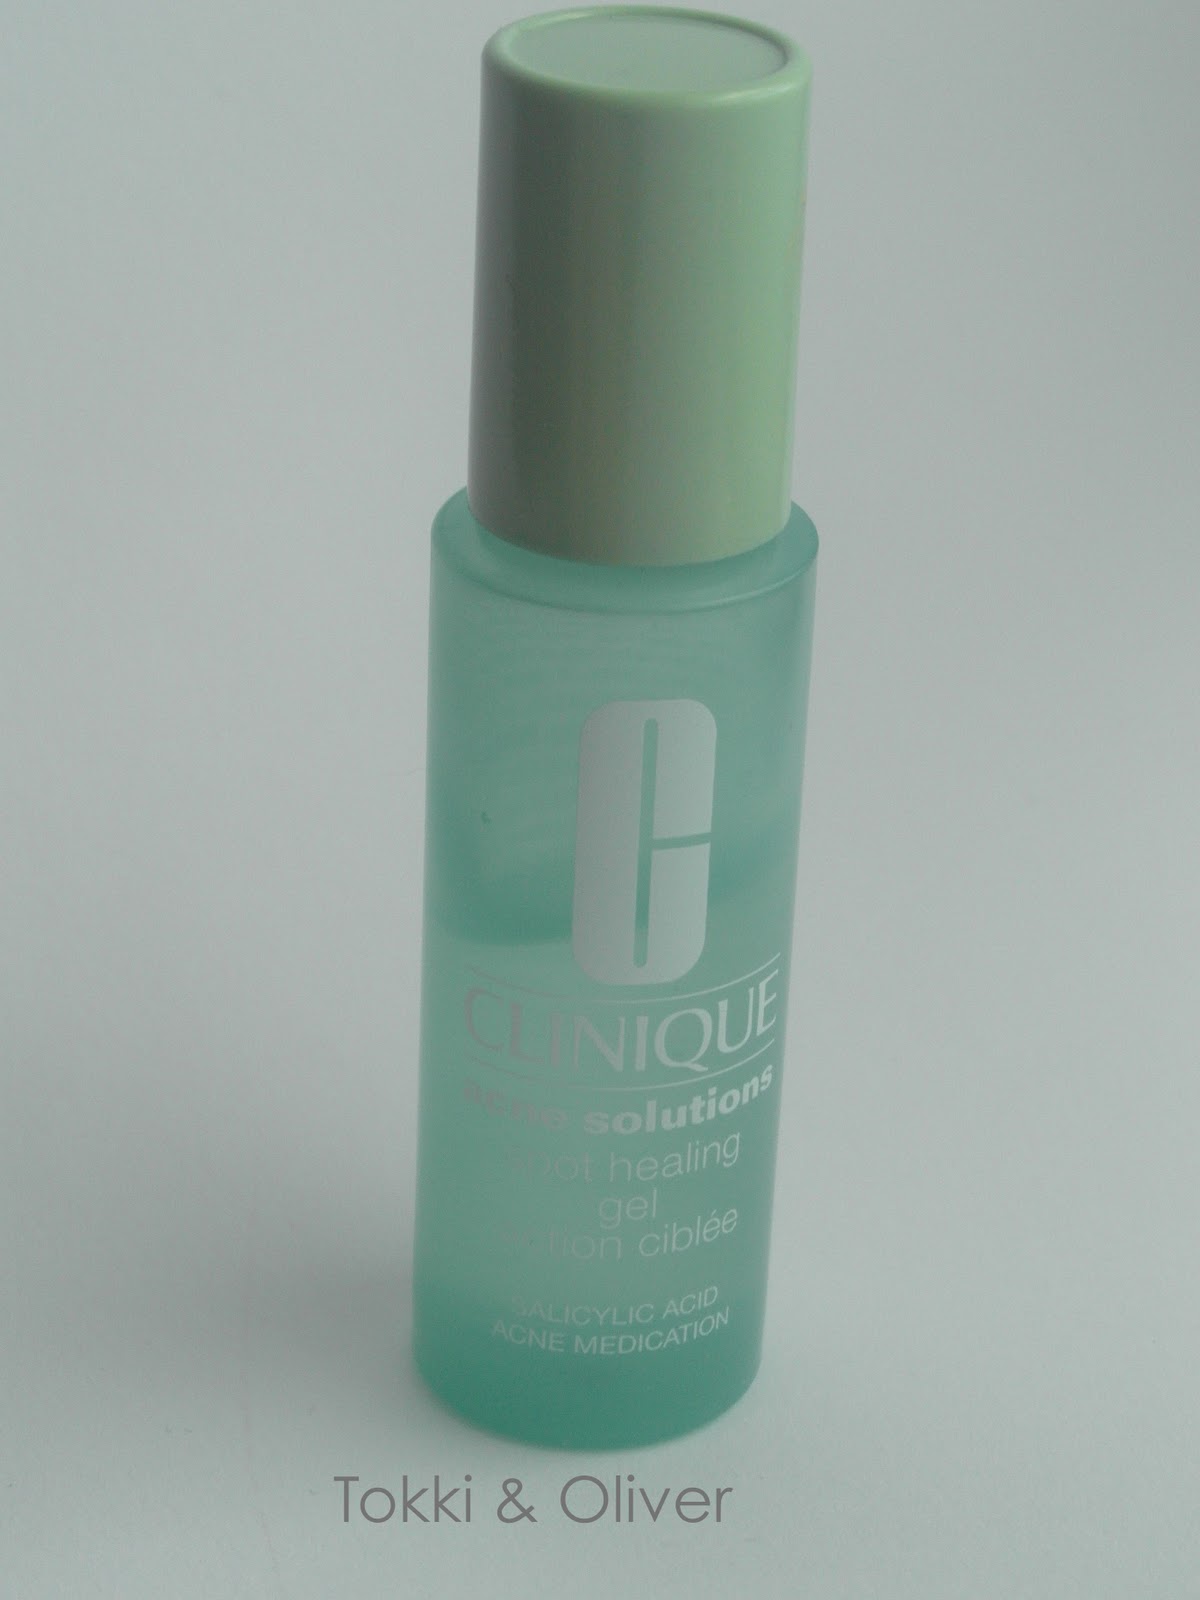 Tokki and Oliver Clinique Acne Solutions Spot Healing Gel